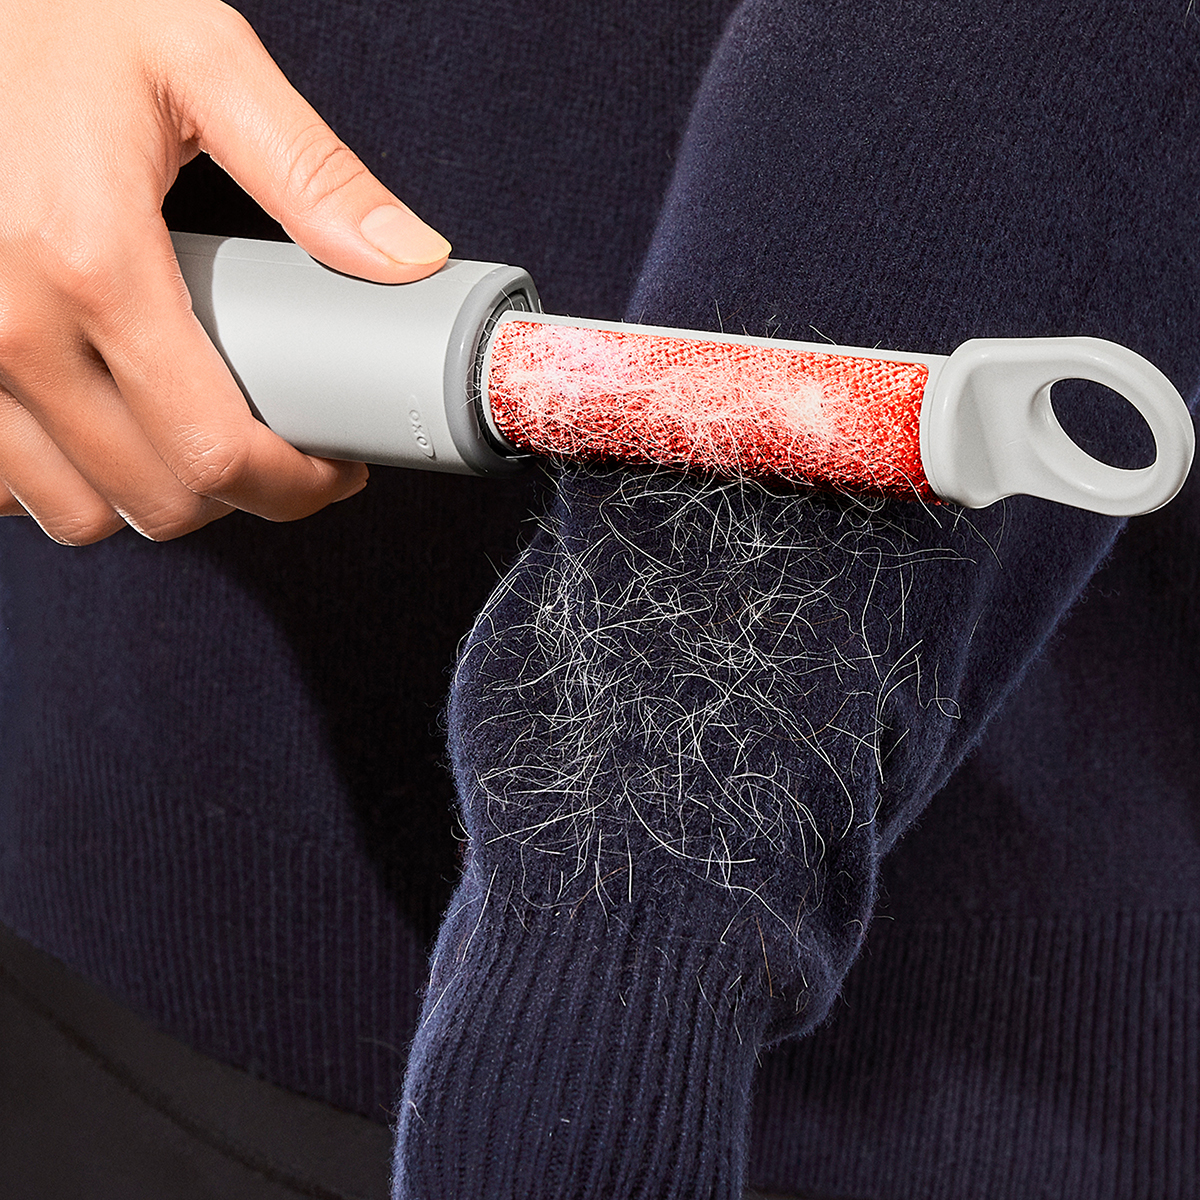 https://www.containerstore.com/catalogimages/477164/10092415-oxo-reusable-lint-roller-ve.jpg